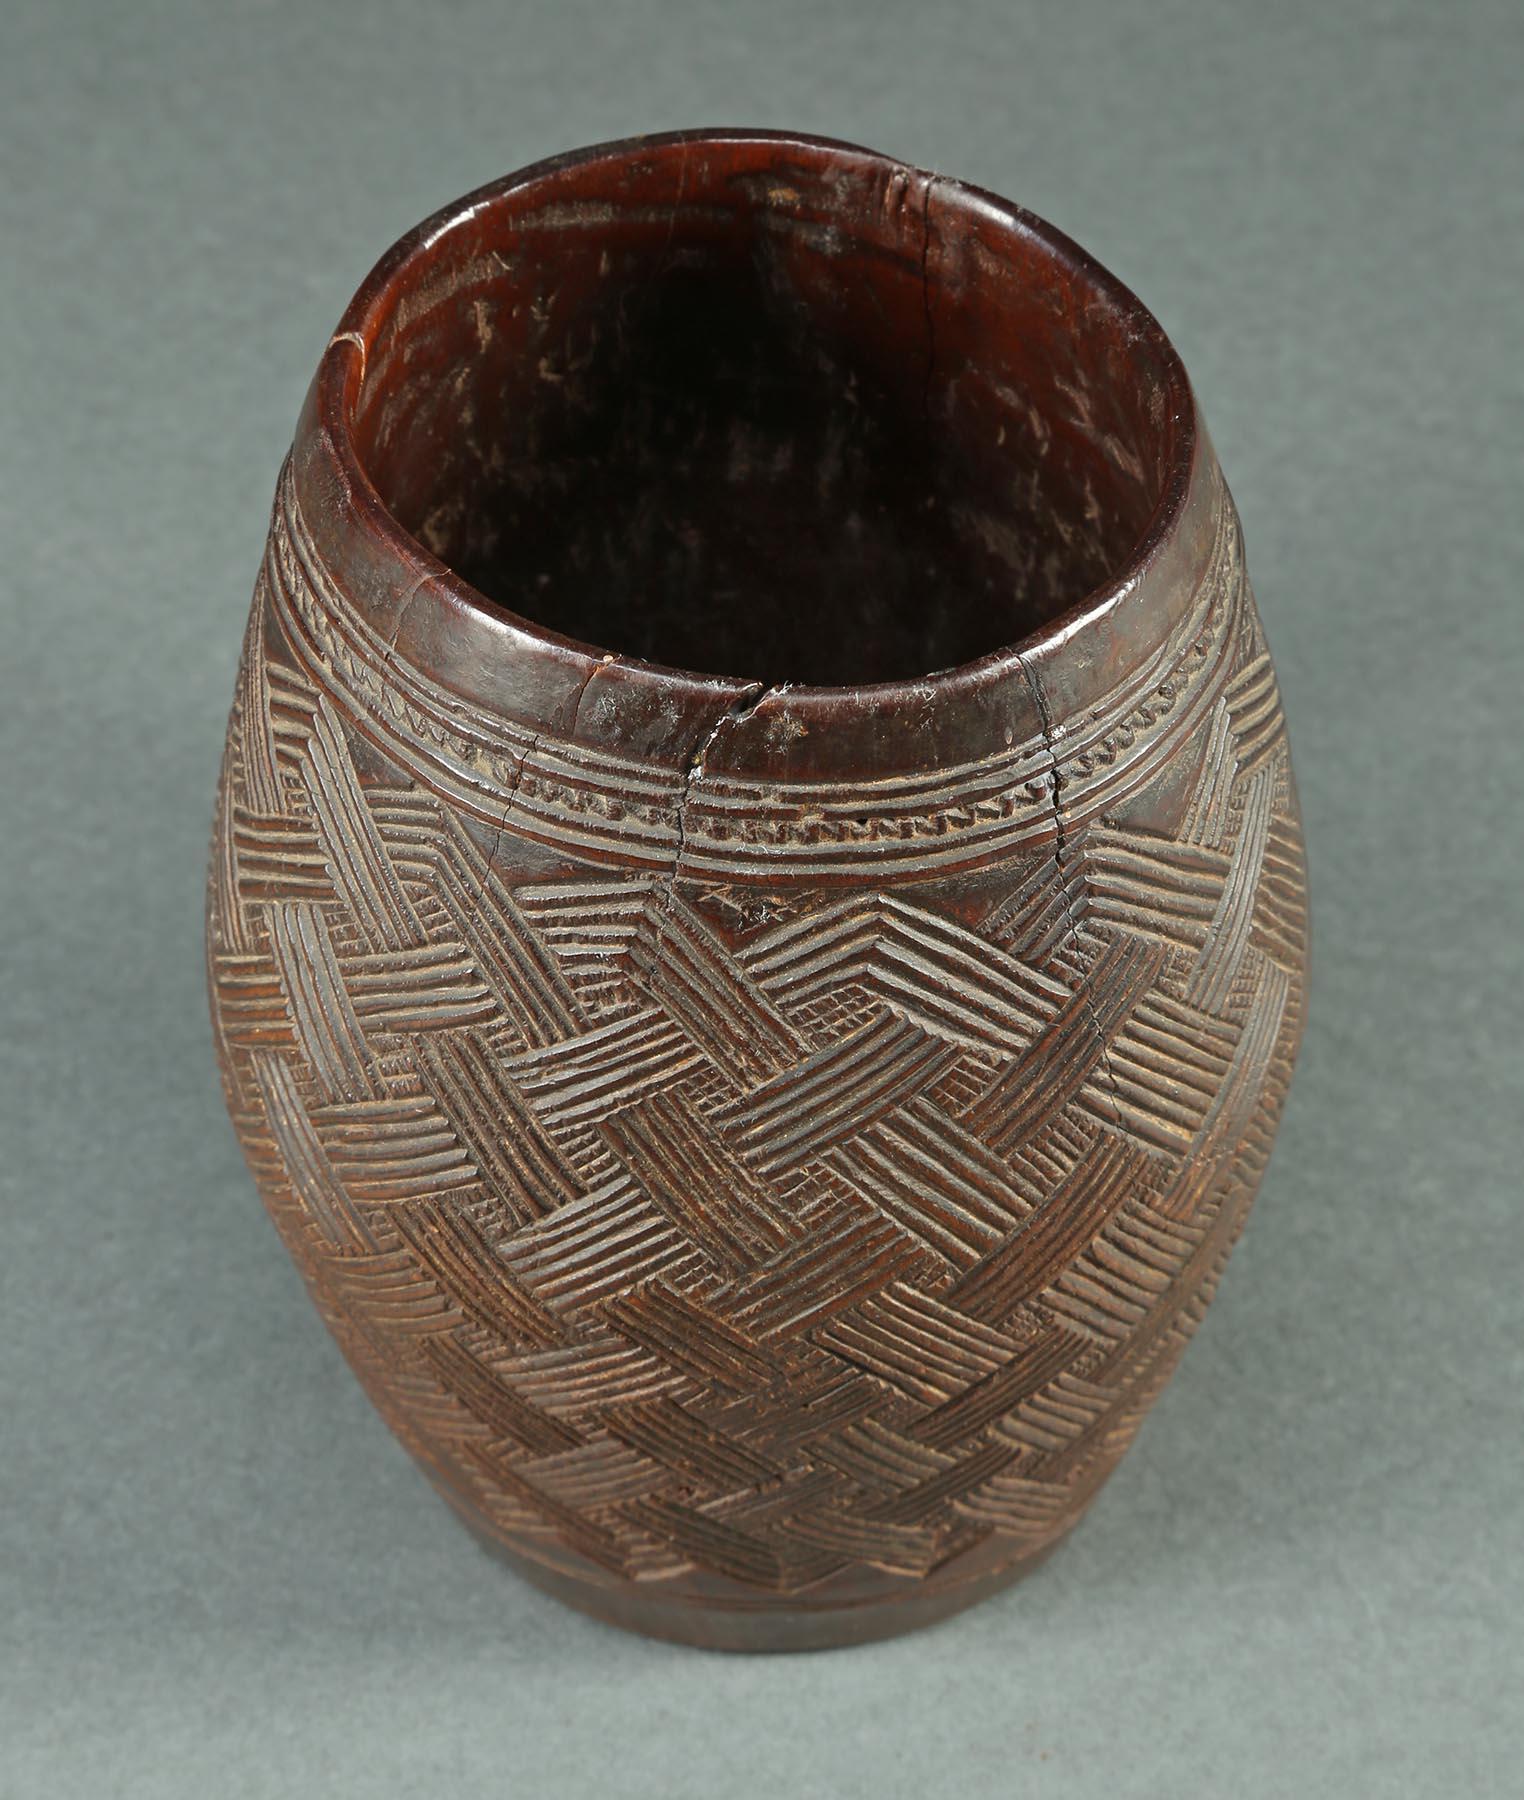 Early 20th century finely carved wood palm wine cup with carved geometric designs, Kuba people, Democratic Republic of Congo, Africa.
The intricate interlocking design is very similar to that found on the embroidered Shoowa Kuba currency cloths